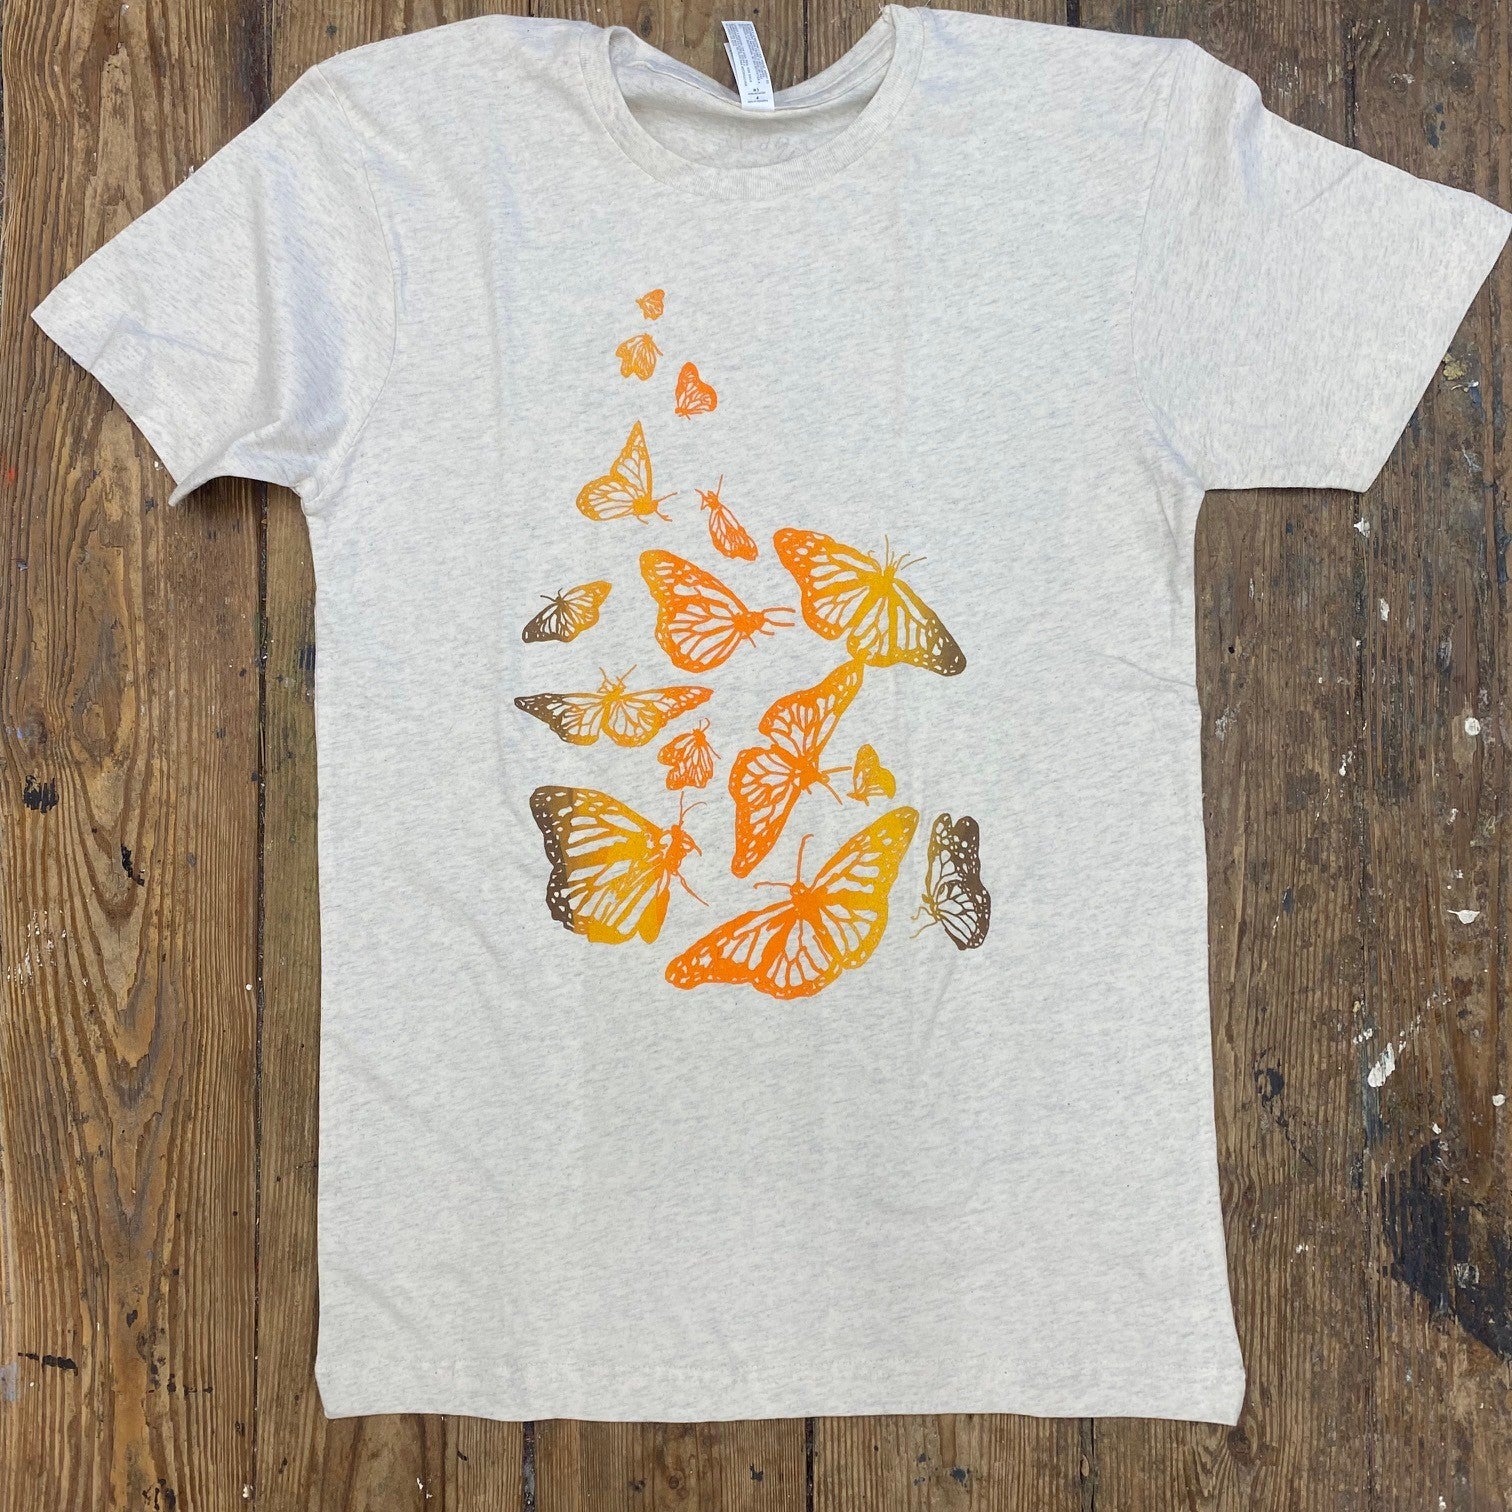 A heather greyish-cream shirt monarch butterflies on the front in gradient ink.